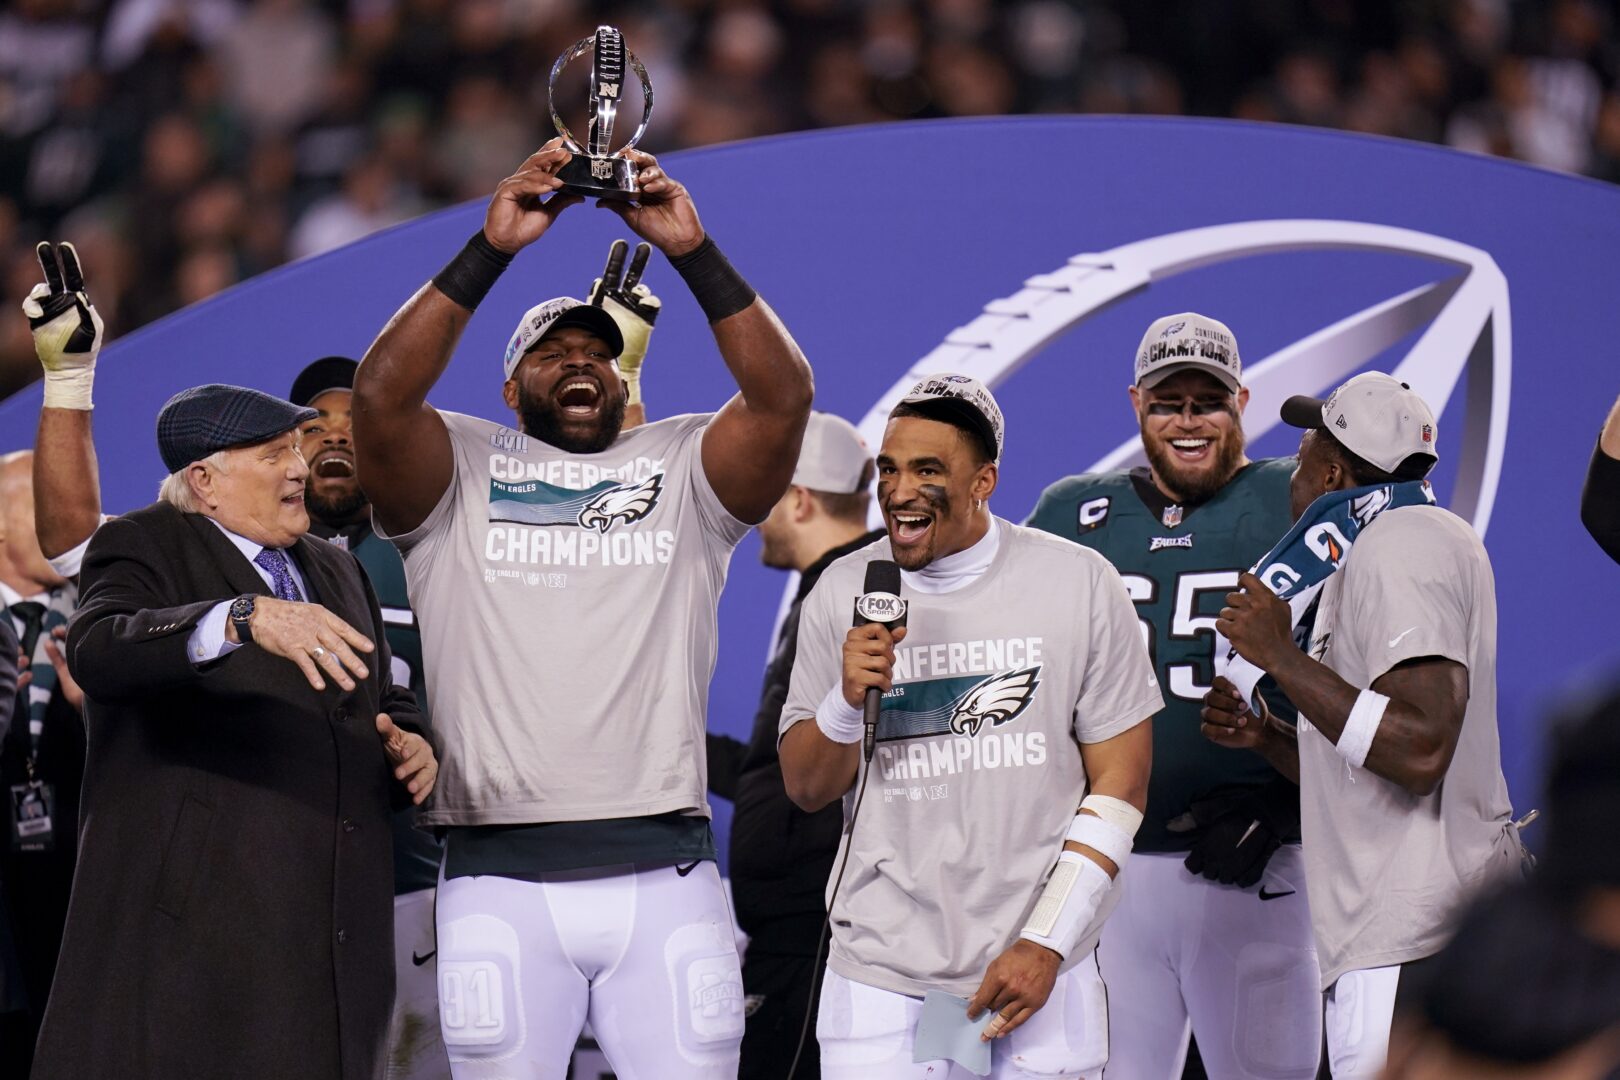 Terry Bradshaw, left, reacts as Philadelphia Eagles defensive tackle Fletcher Cox, second from left, hoists the George Halas Trophy as quarterback Jalen Hurts, center, holds a microphone after the NFC Championship NFL football game between the Philadelphia Eagles and the San Francisco 49ers on Sunday, Jan. 29, 2023, in Philadelphia. The Eagles won 31-7. 